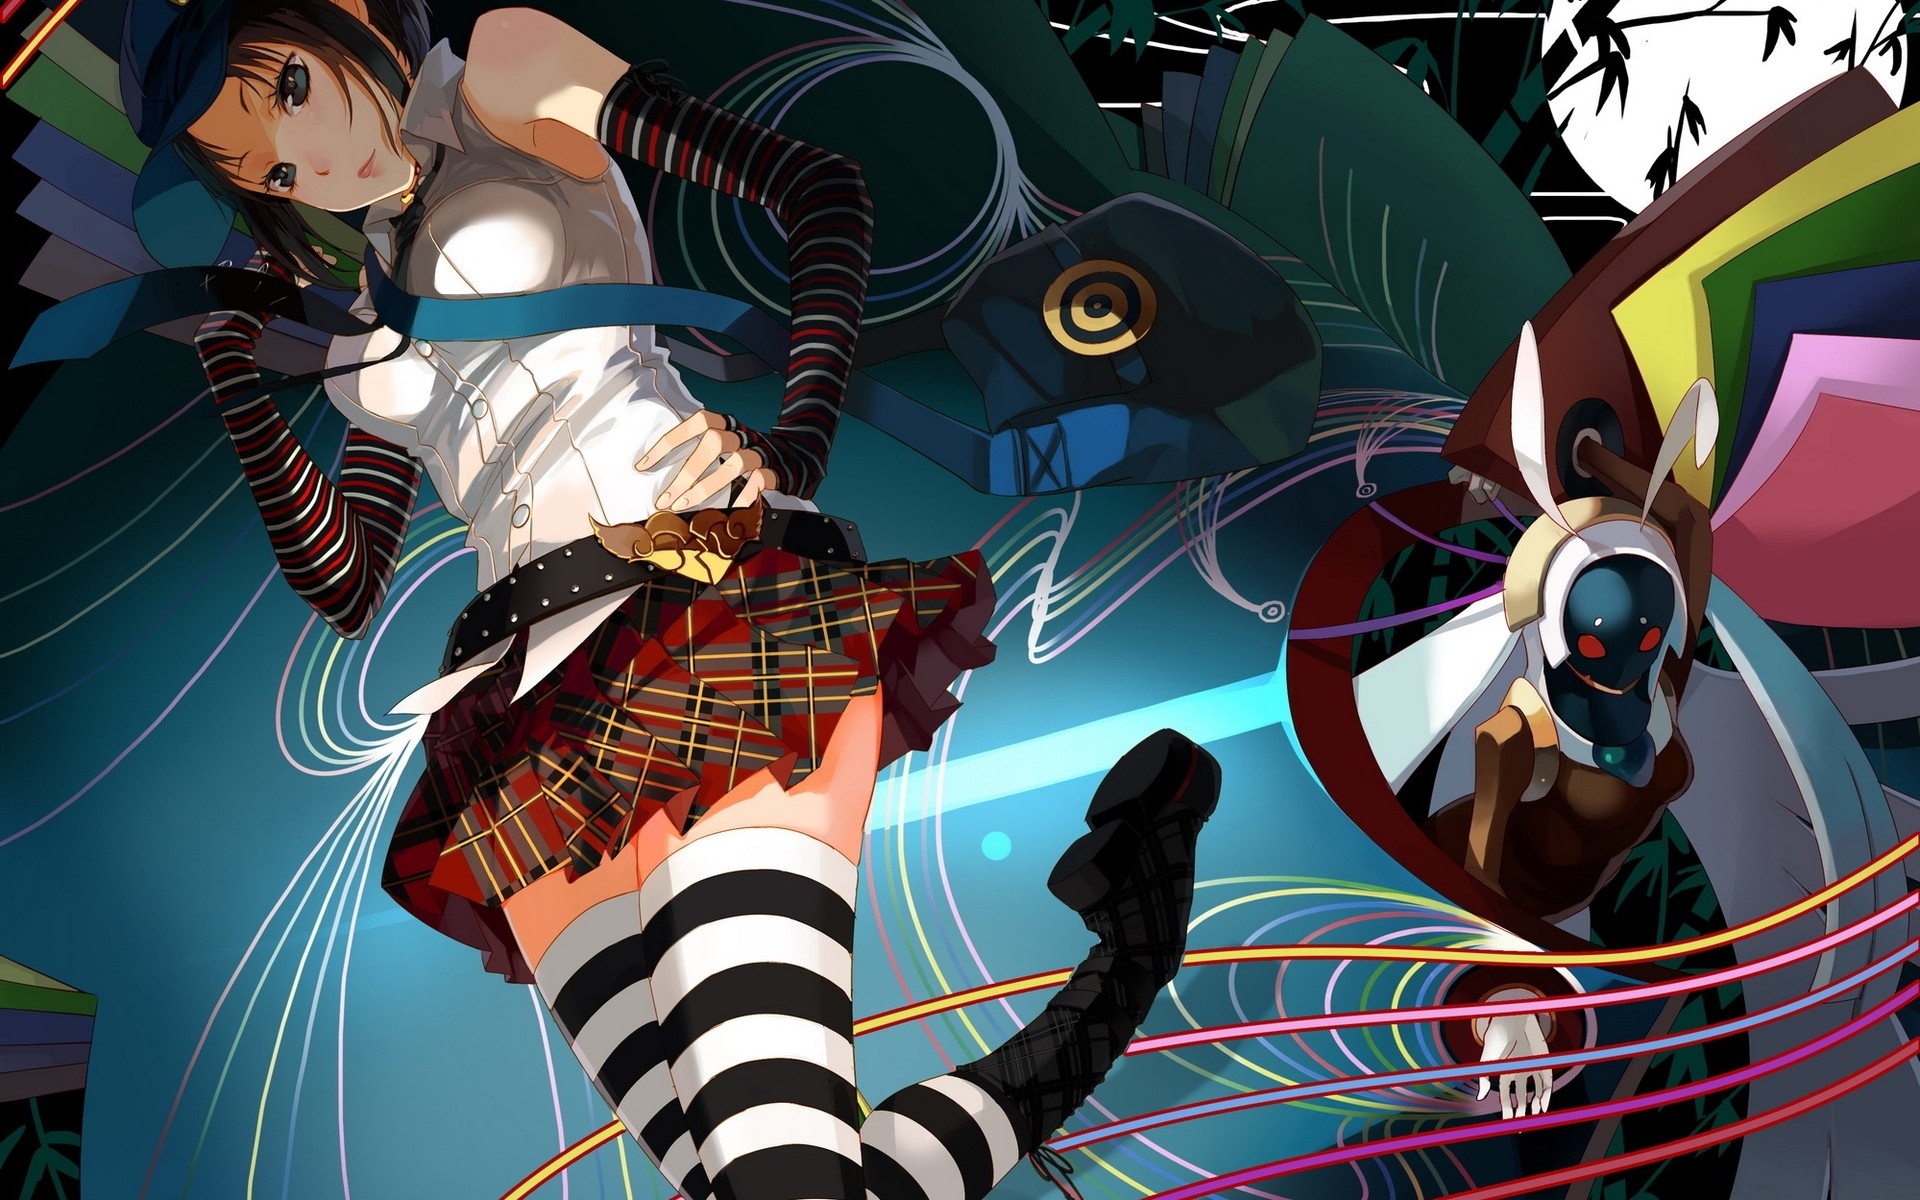 Anime 1920x1200 anime thigh-highs Persona 3 Persona 4 Marie (Persona 4) Persona series miniskirt striped stockings stockings anime girls video games video game girls